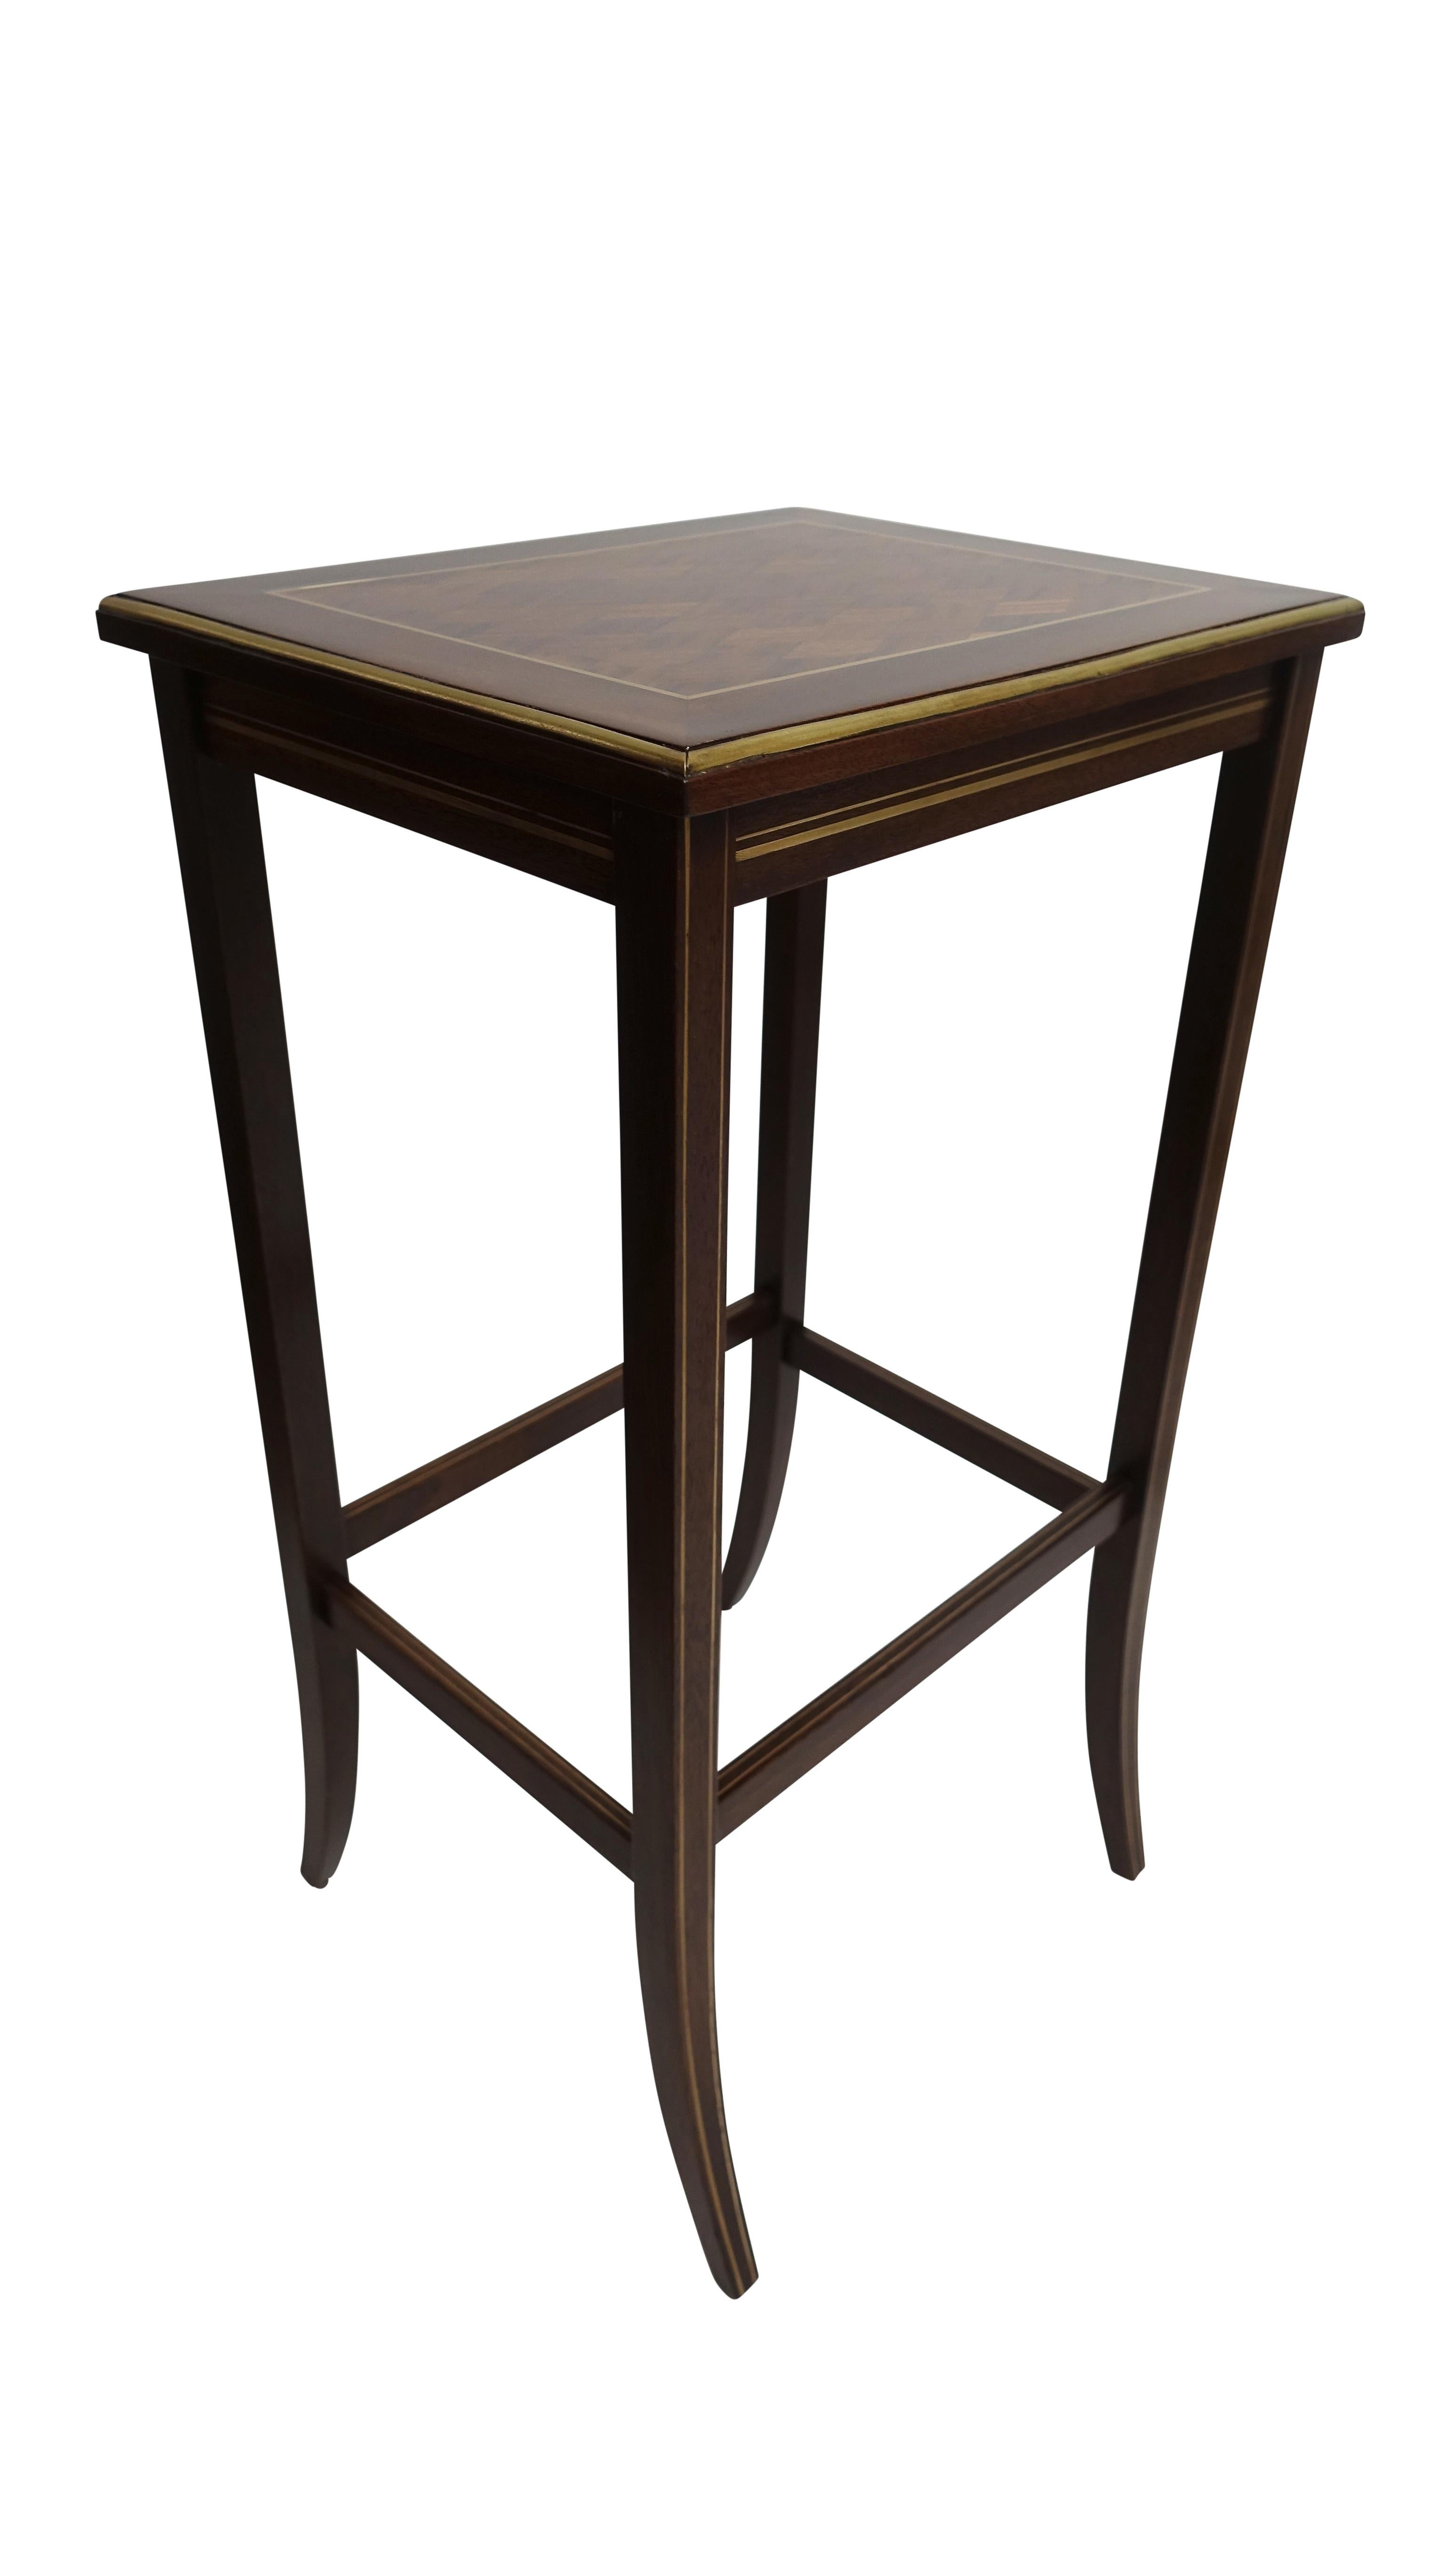 Set of Four Mahogany Nesting Tables with Brass Inlay and Trim, Mid-20th Century In Excellent Condition For Sale In San Francisco, CA